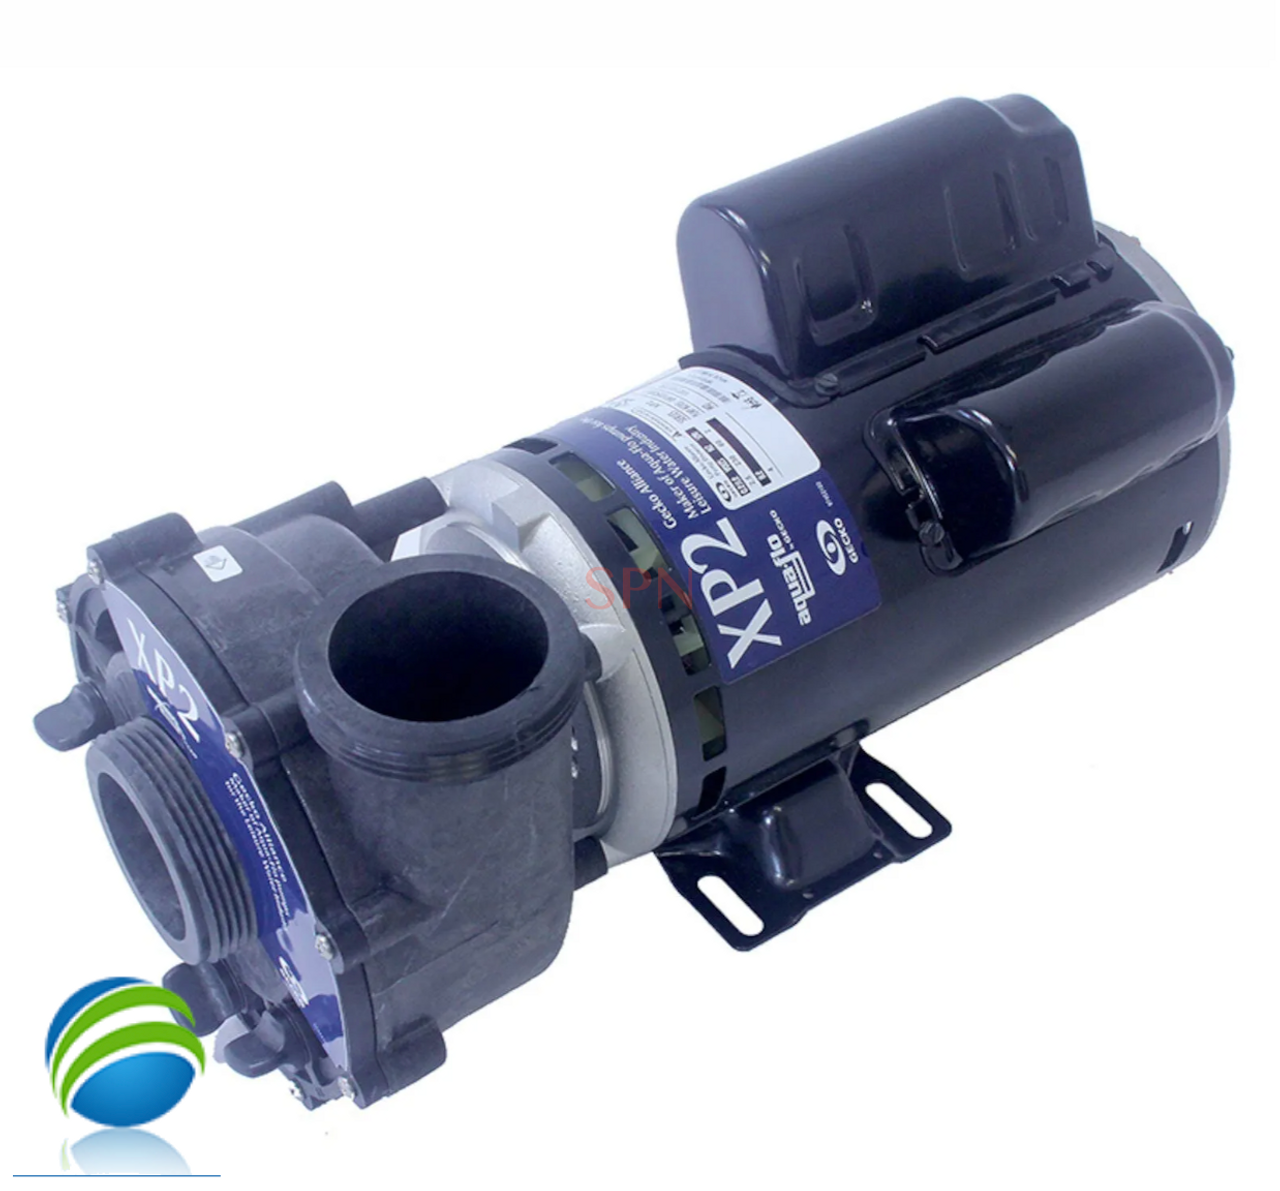 Replacement Pump, 39583, Watkins, Vendor Code 4081, Hotspring, Solana, Hot Spot, Wavemaster, 1.5HP, 115v, 13.0A, 48 frame, 2"x 2", 1 or 2 Speed
The pressure and suction sides measures 3" edge to edge on the threads..